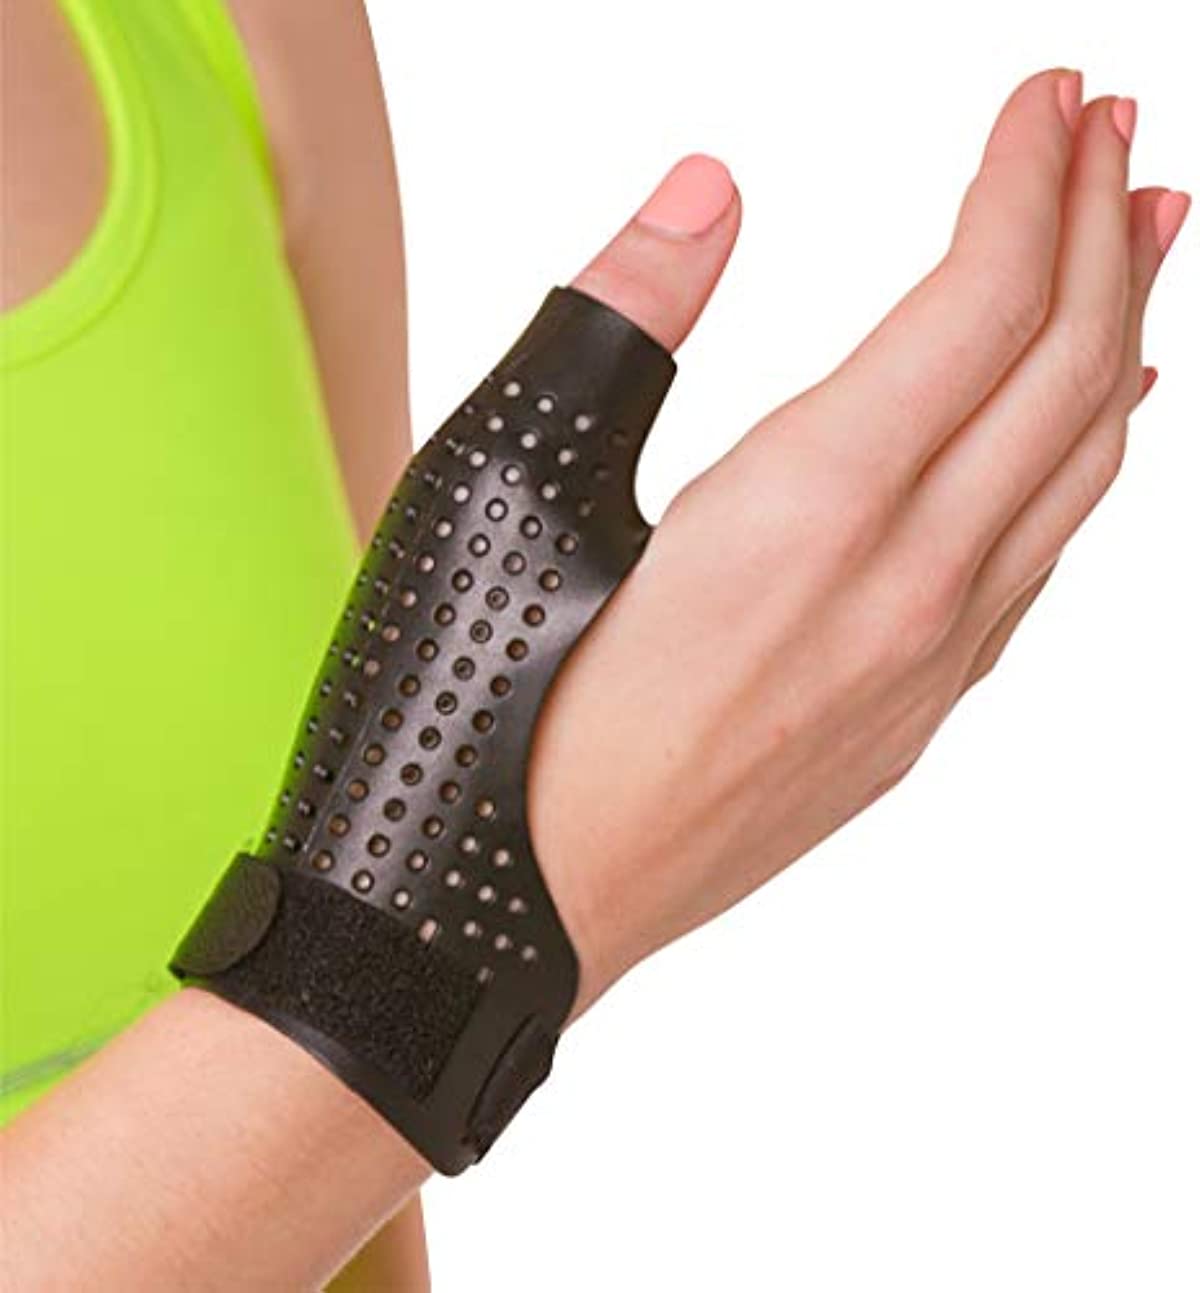 BraceAbility Hard Plastic Thumb Splint | Arthritis Treatment Brace to Immobilize & Stabilize CMC, Basal and MCP Joints for Trigger Thumb, Tendonitis Pain, Sprains (Small Left)